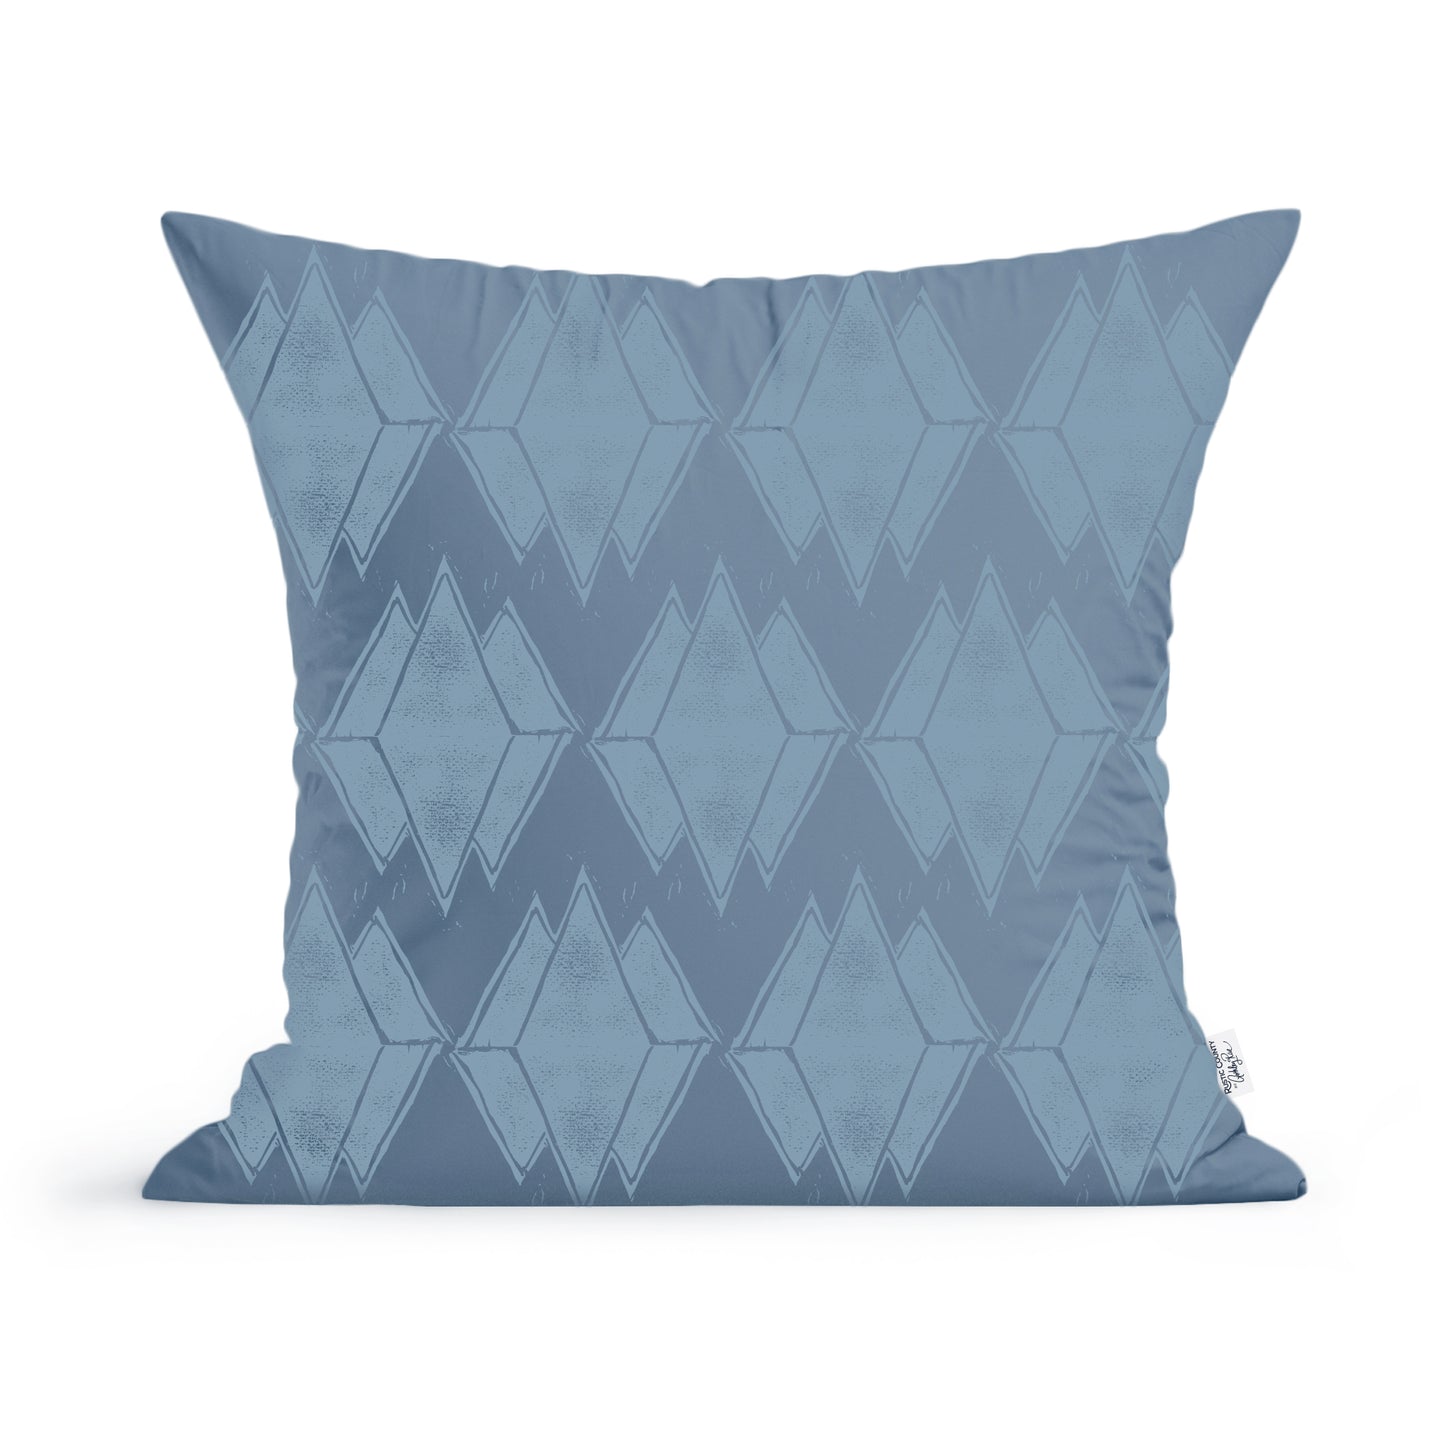 A Rustic County Maine Mountain Reflections Pillow with a geometric pattern in shades of blue, featuring a series of repeated diamond and triangular shapes. The background is a light blue with slightly darker blue designs, ideal for modern home decor.